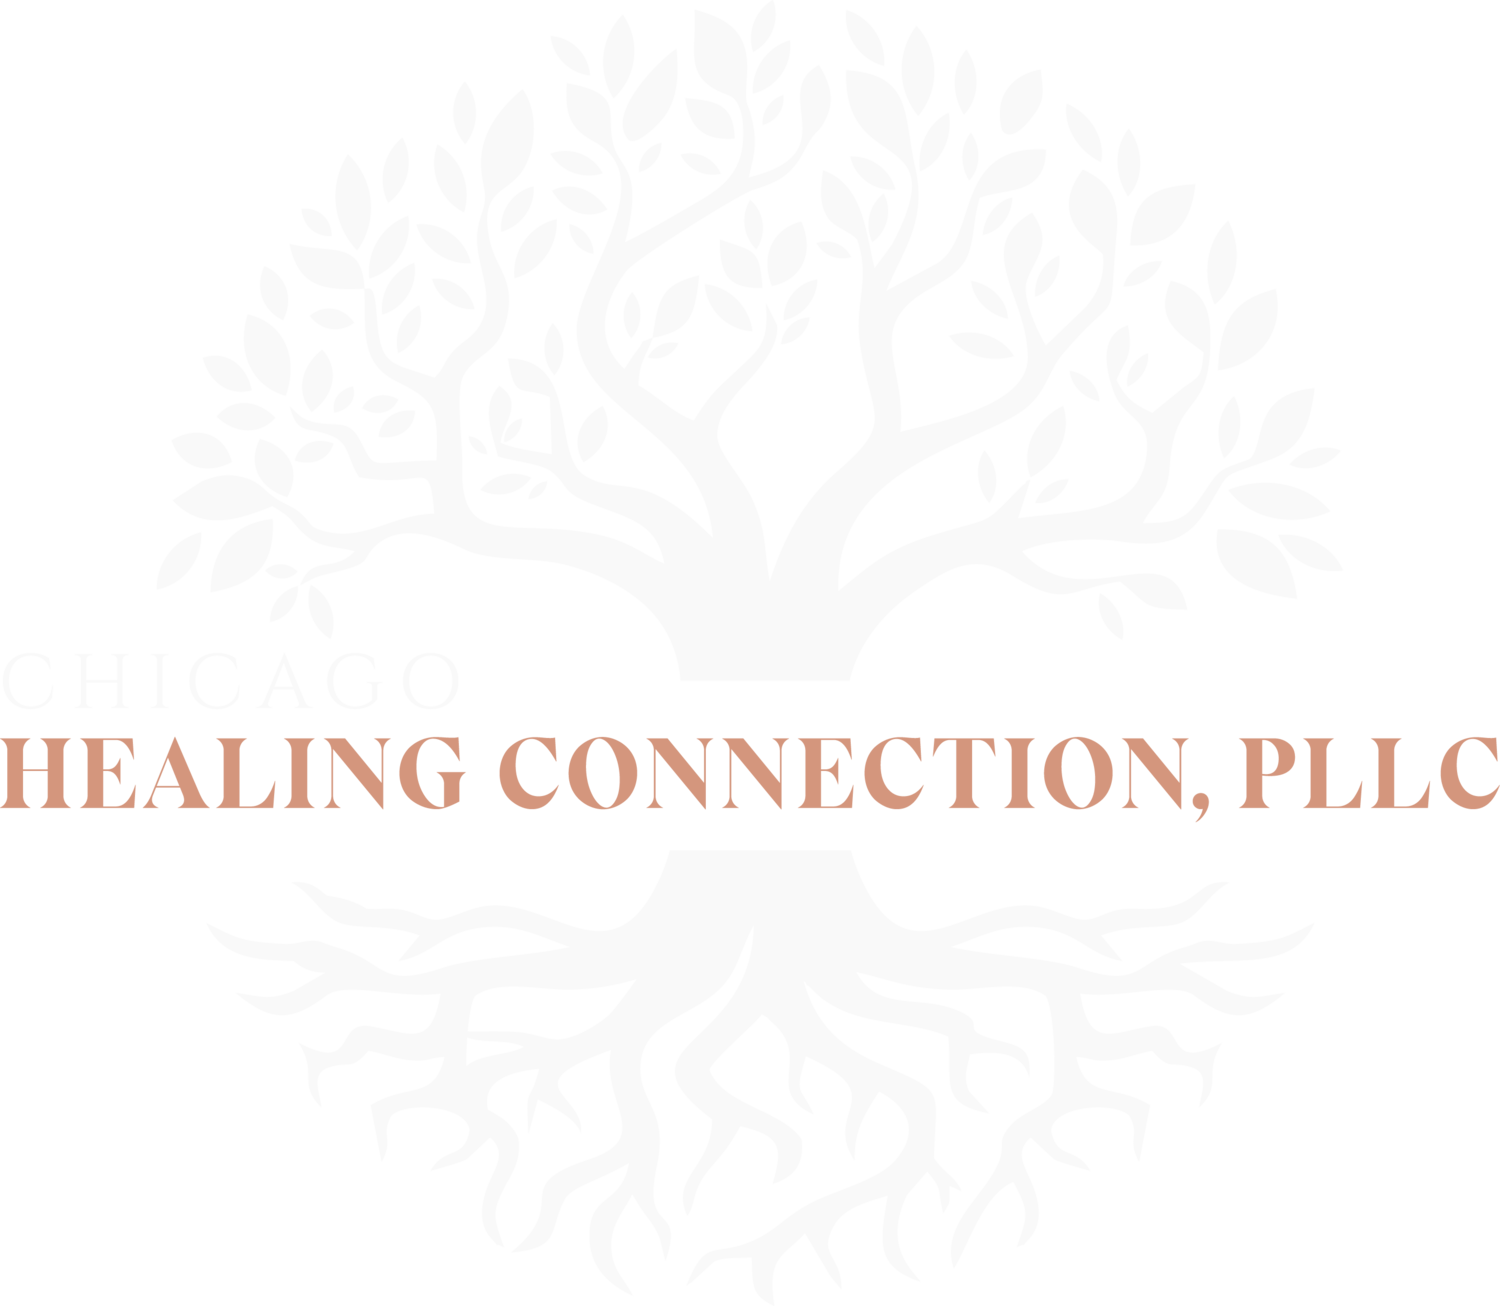 Chicago Healing Connection, PLLC